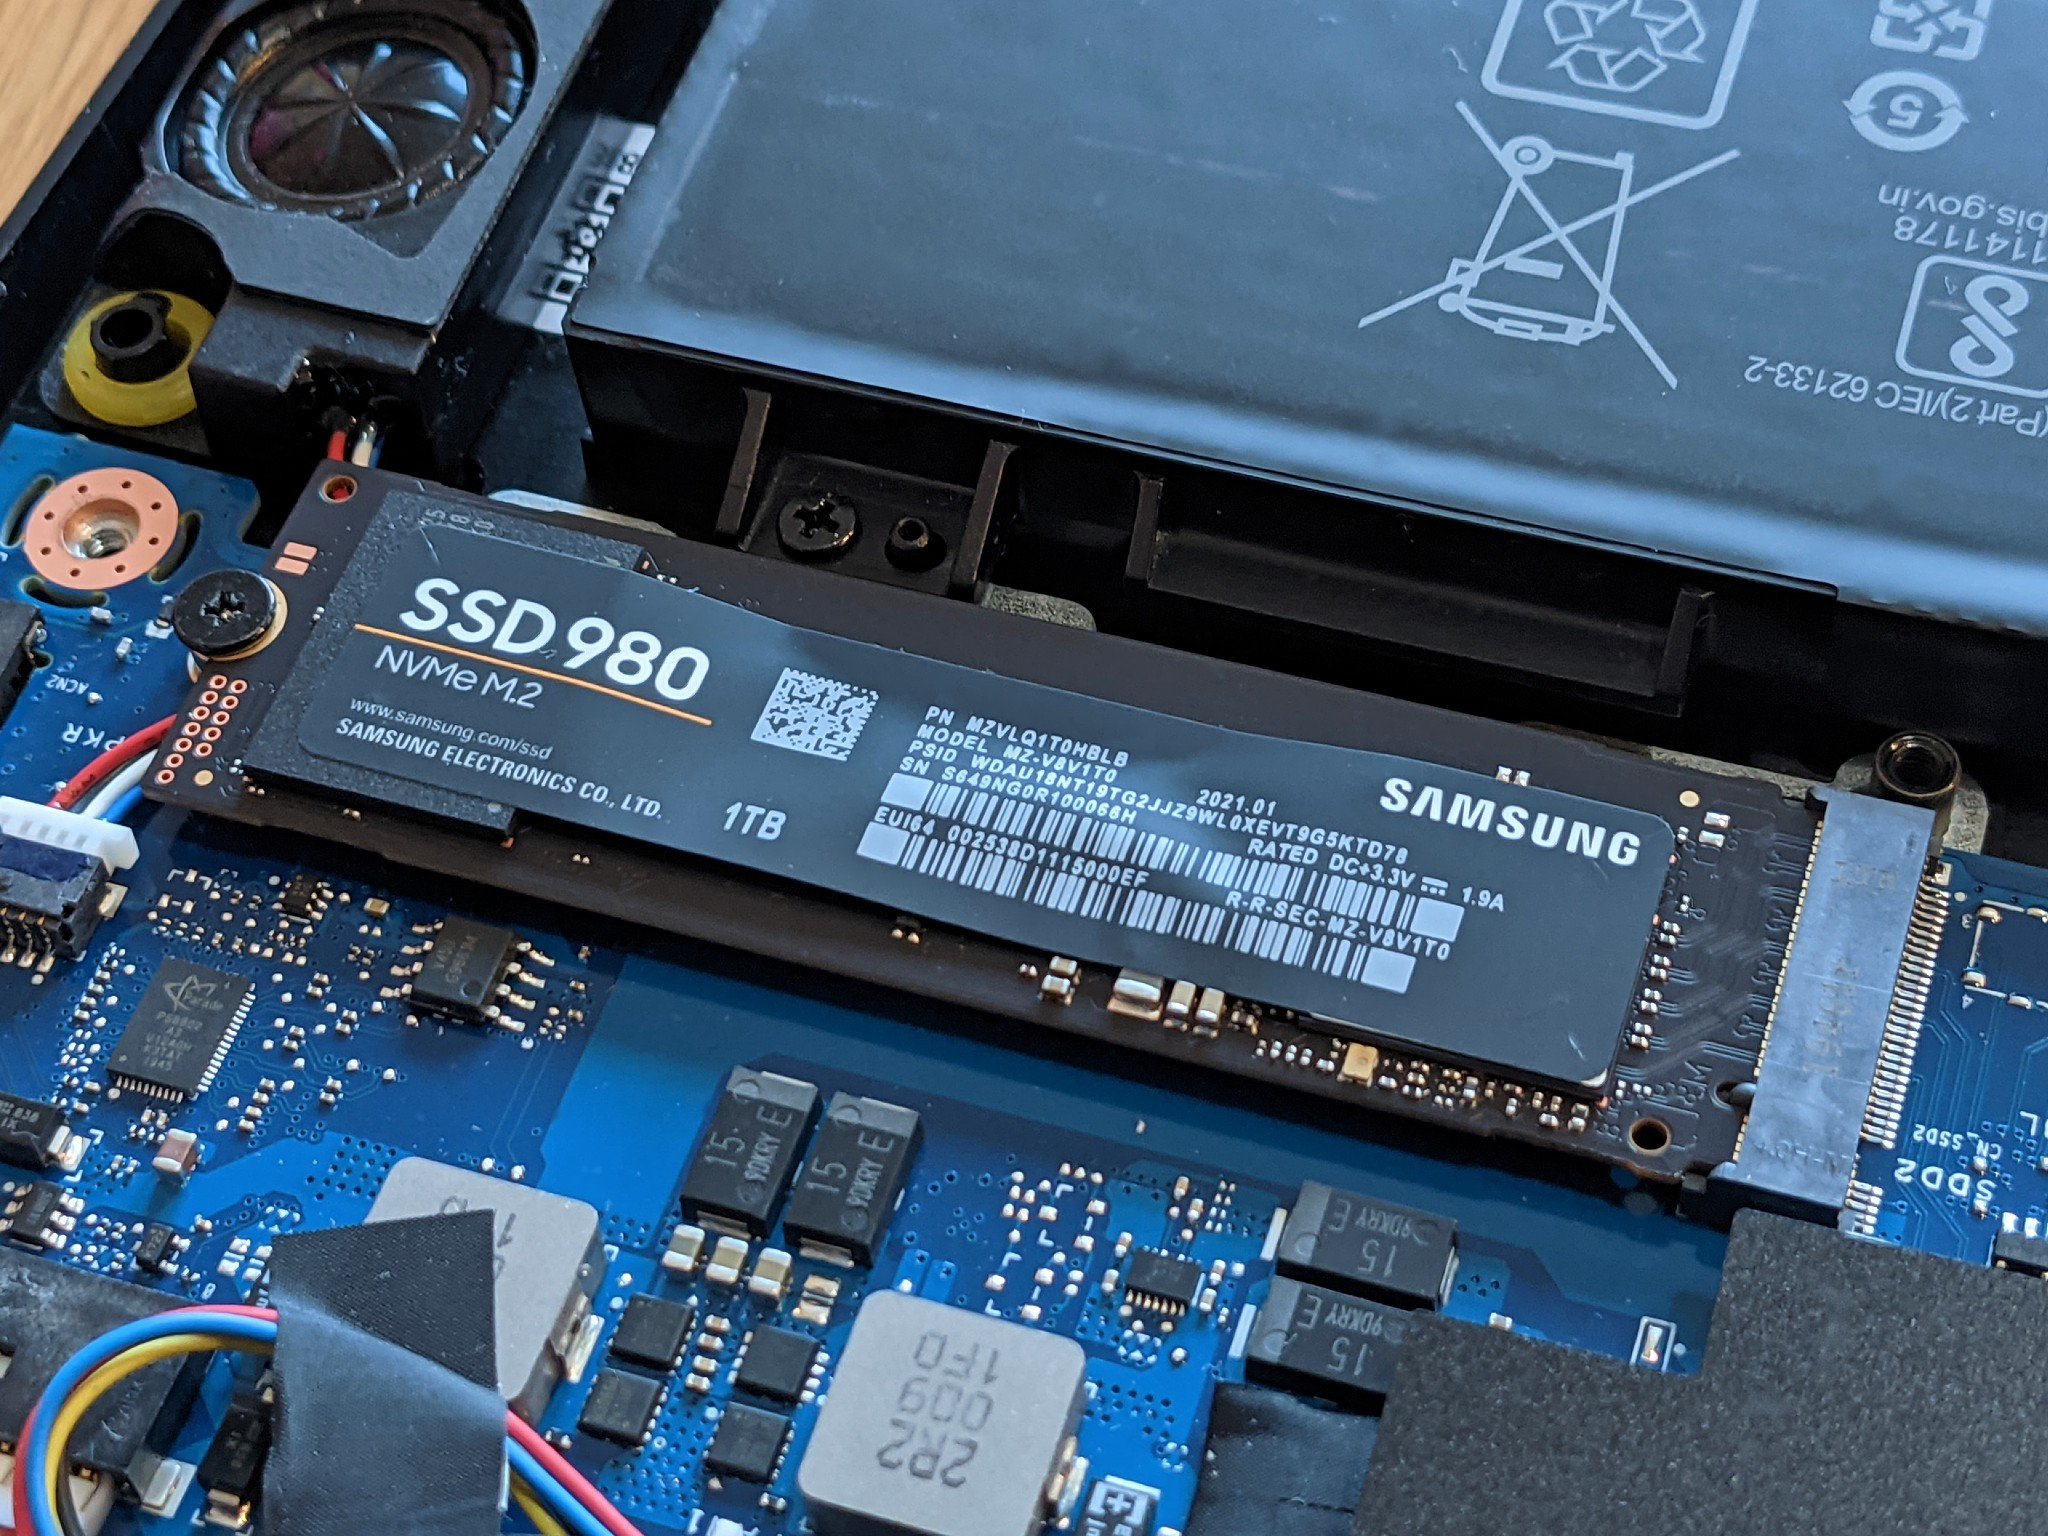 Samsung 980 SSD Review: Loses the DRAM but not the performance